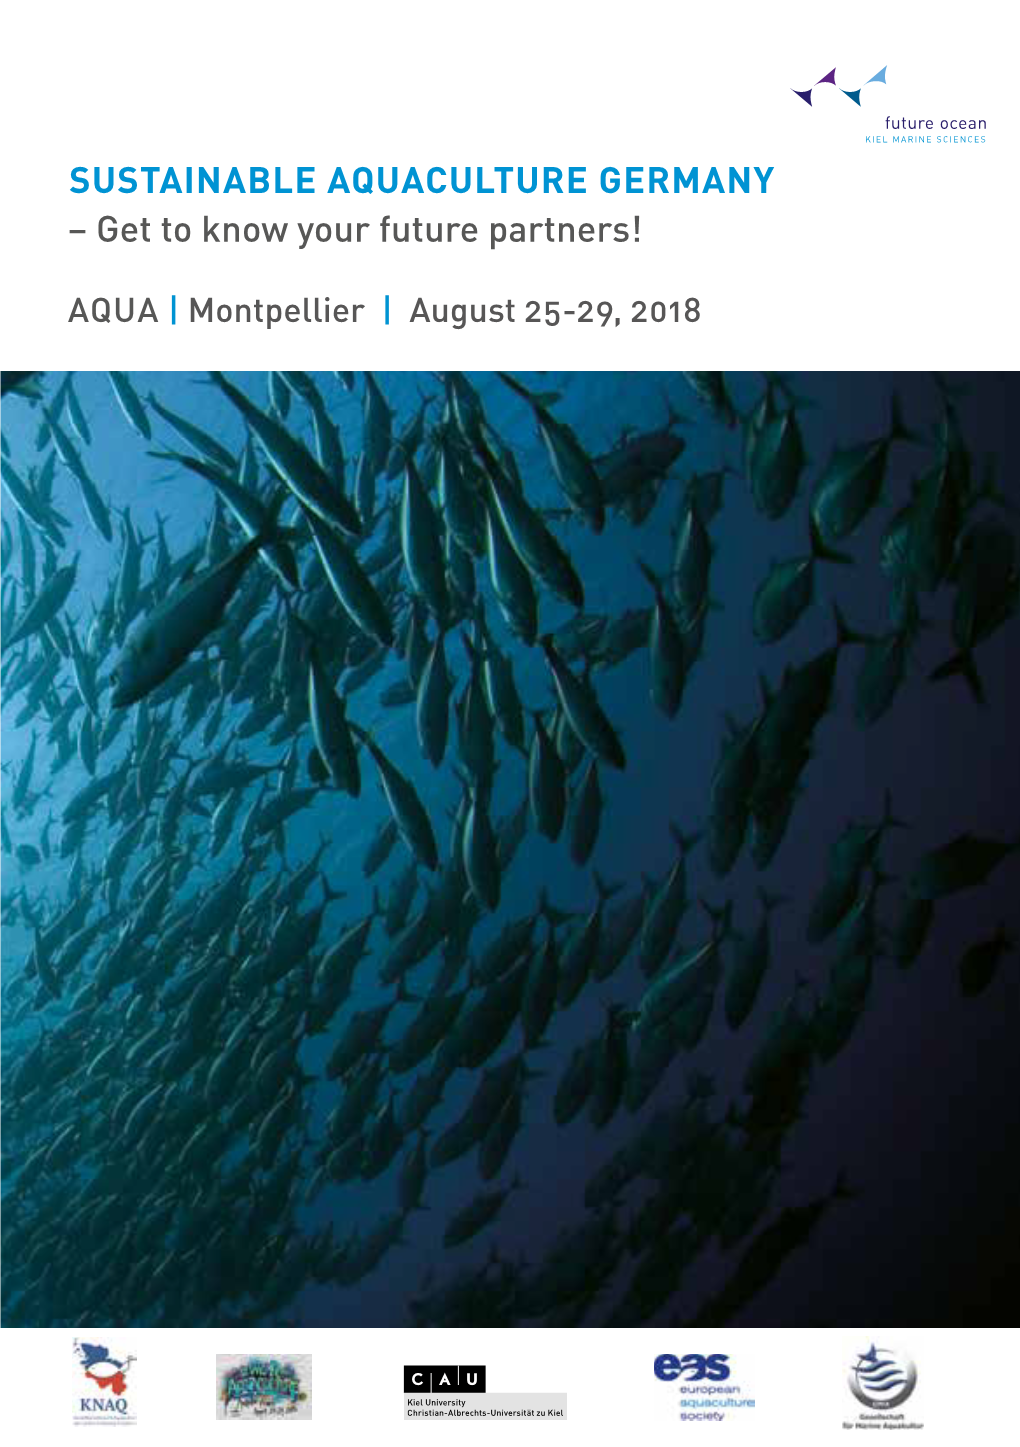 SUSTAINABLE AQUACULTURE GERMANY – Get to Know Your Future Partners!